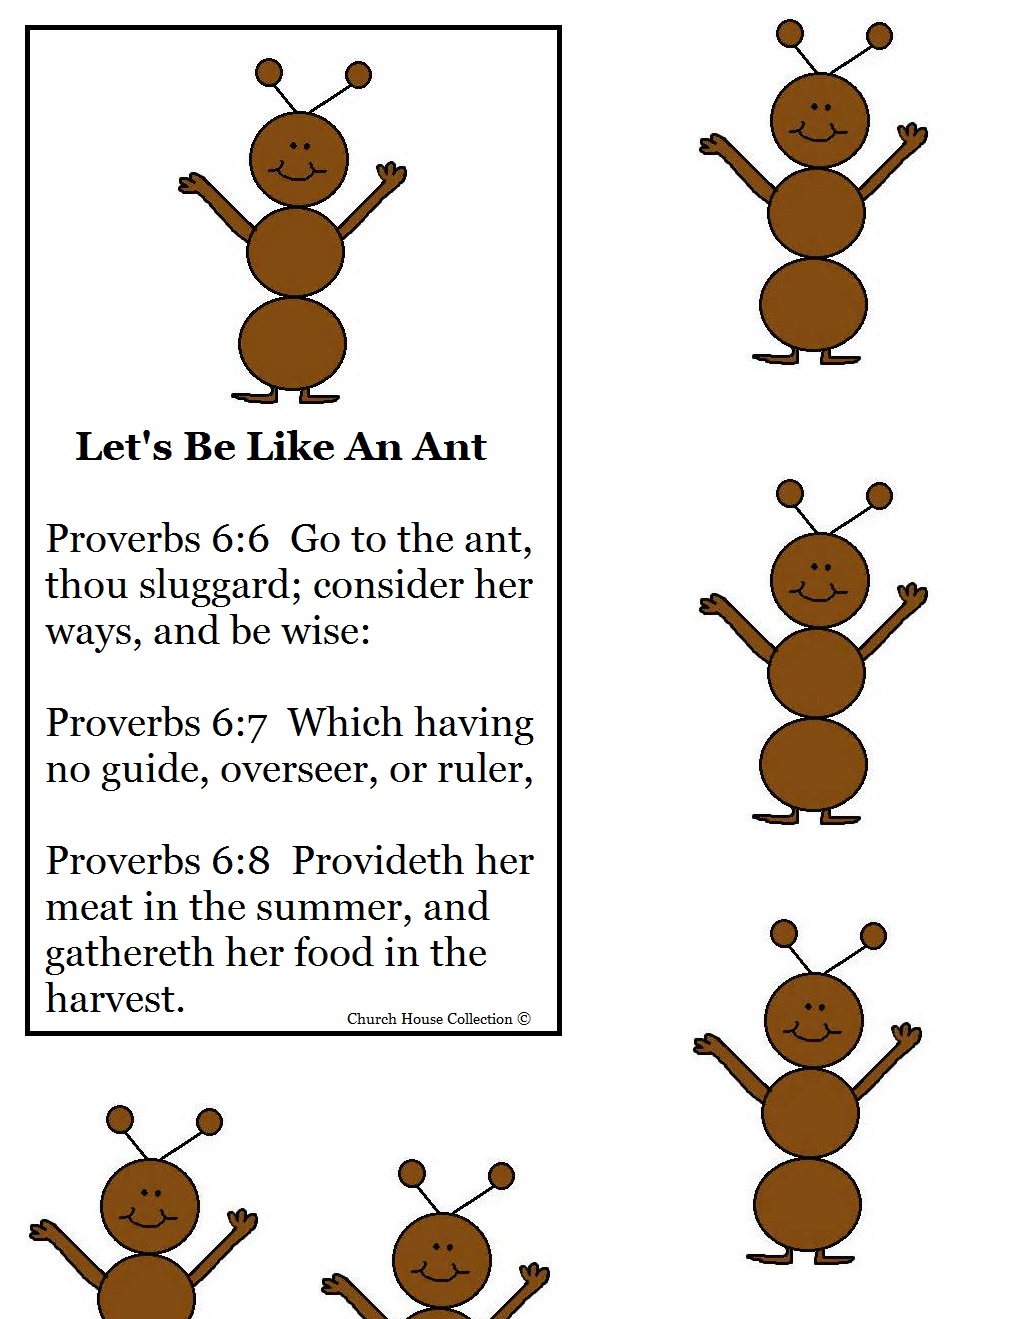 church-house-collection-blog-let-s-be-like-an-ant-folder-lapbook